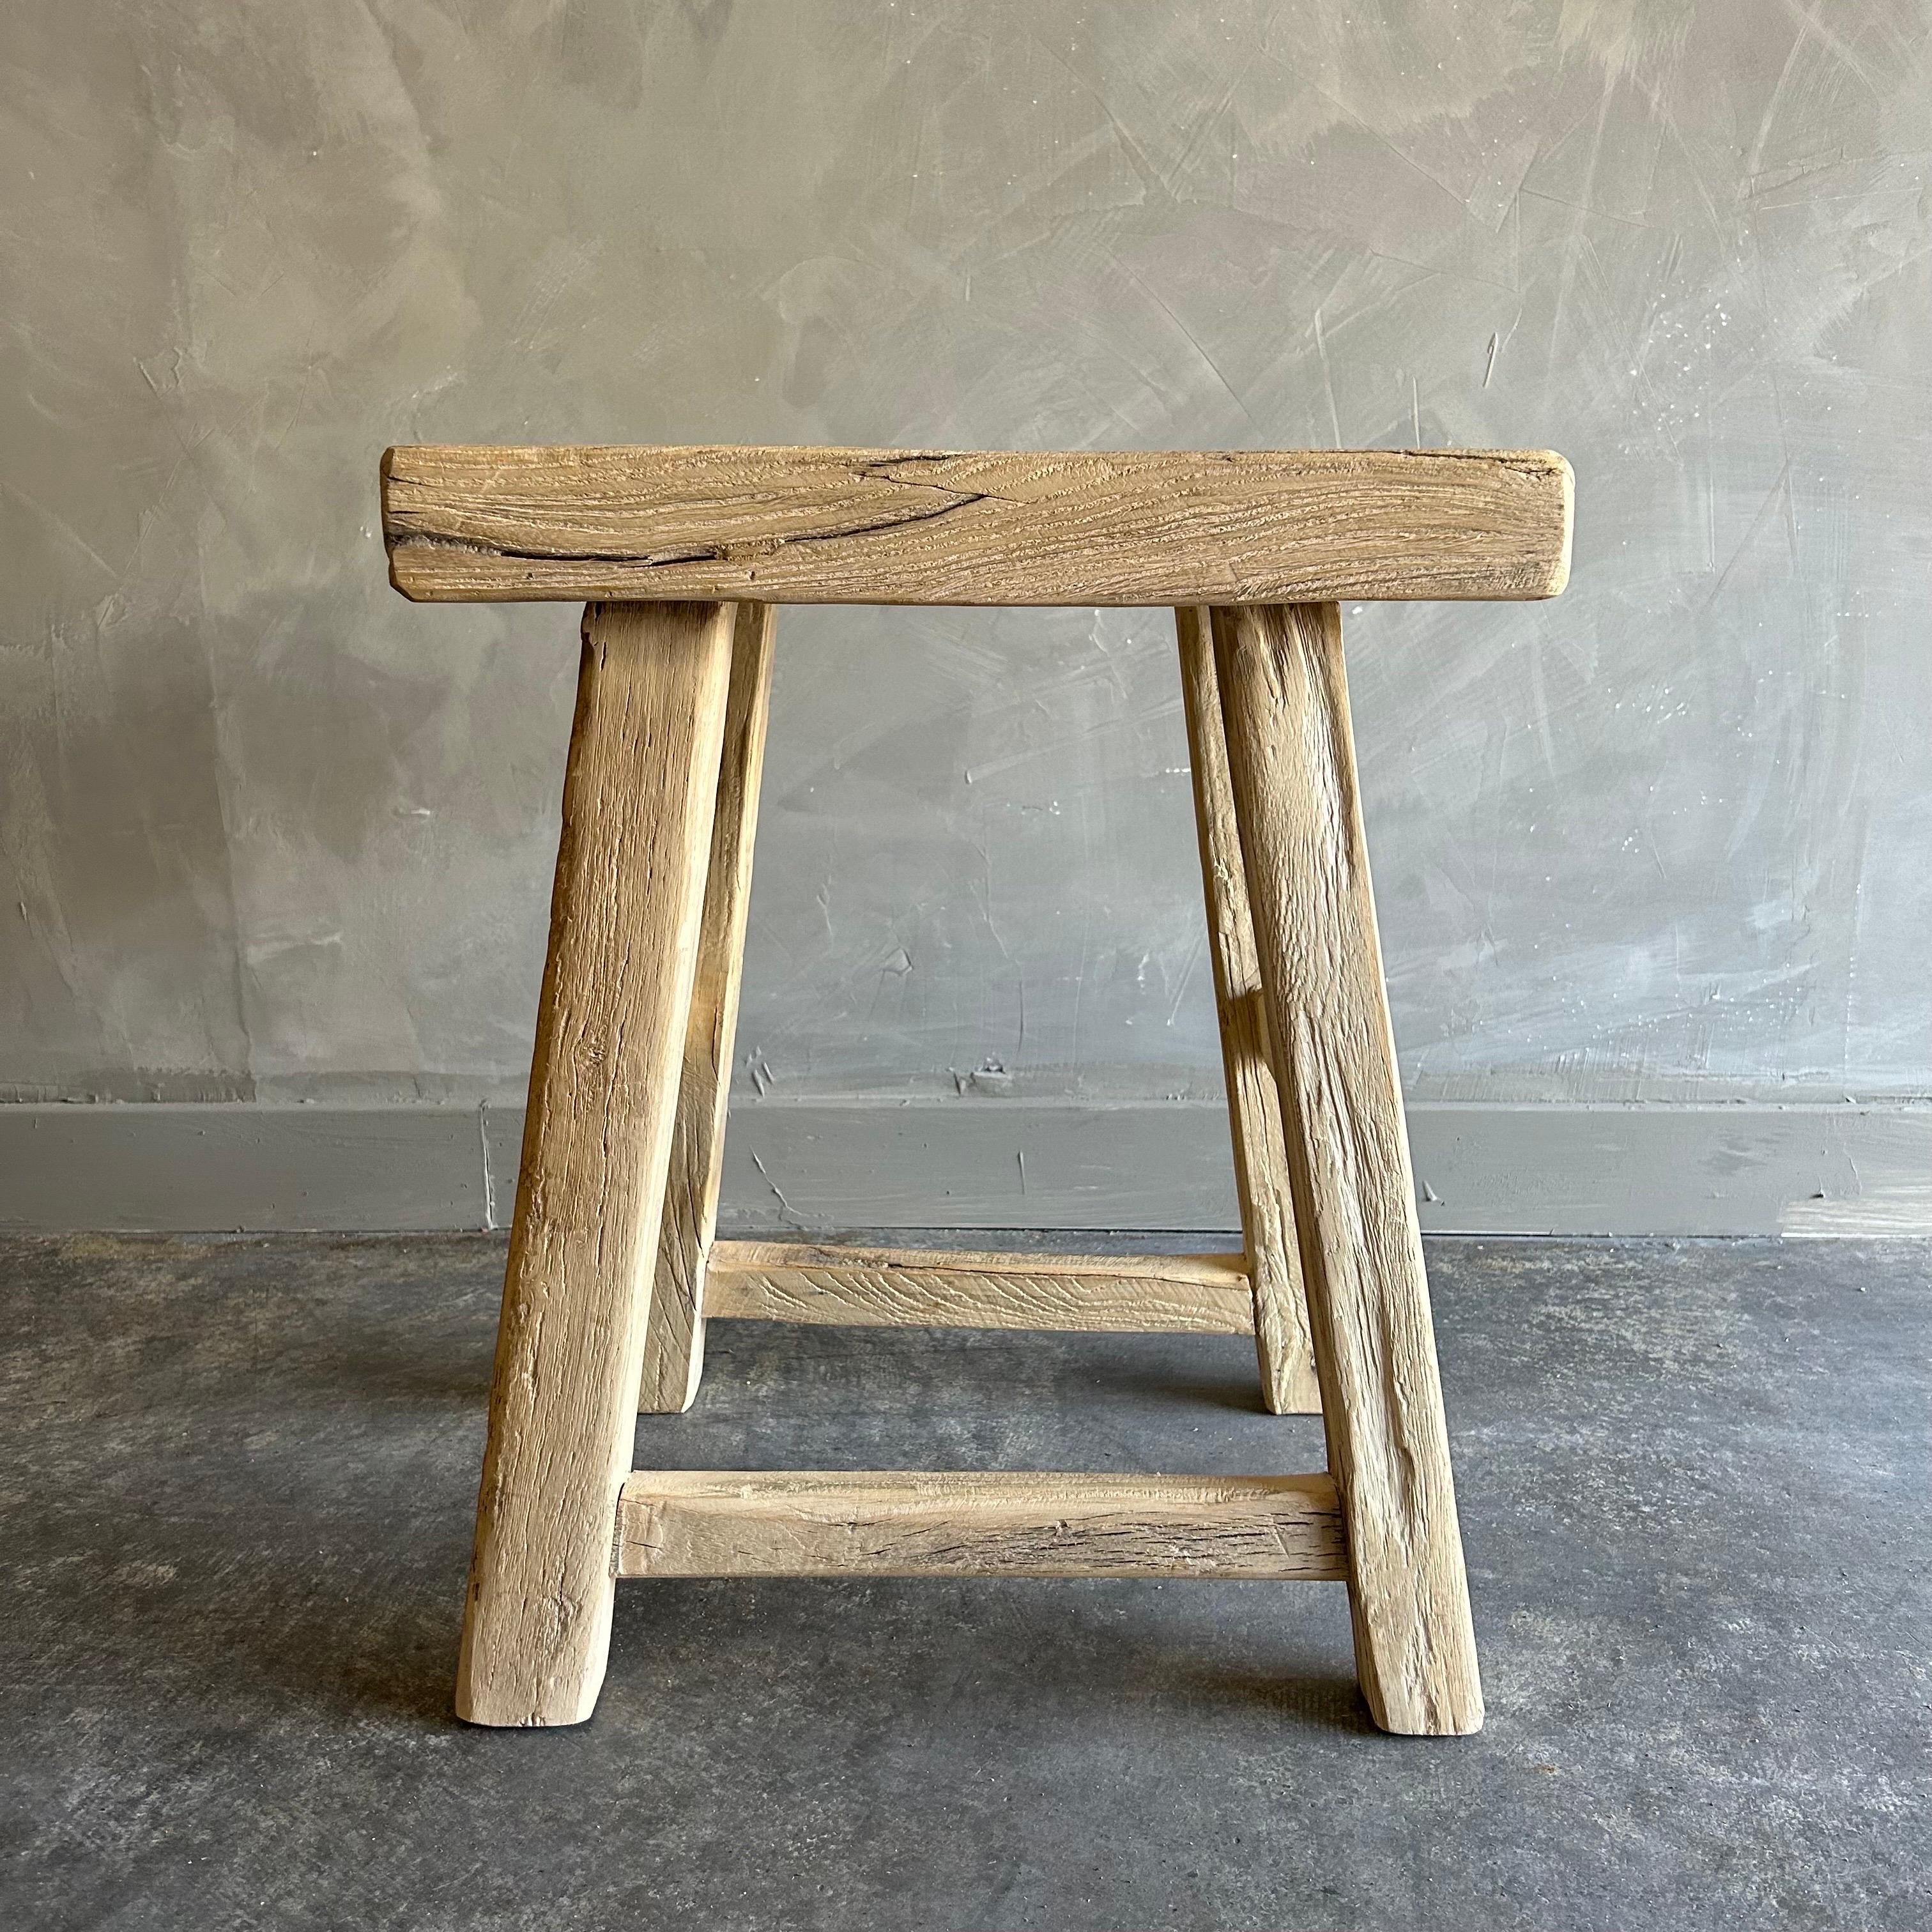 Welcome to bloomhomeinc we stock over 2000 items, please scroll down and click view sellers other items to see more!
Size: 18”w x 13”d x 20”h
SD:9.5”
Vintage Antique Elm Wood stool made from vintage reclaimed elm wood. Beautiful antique patina, with